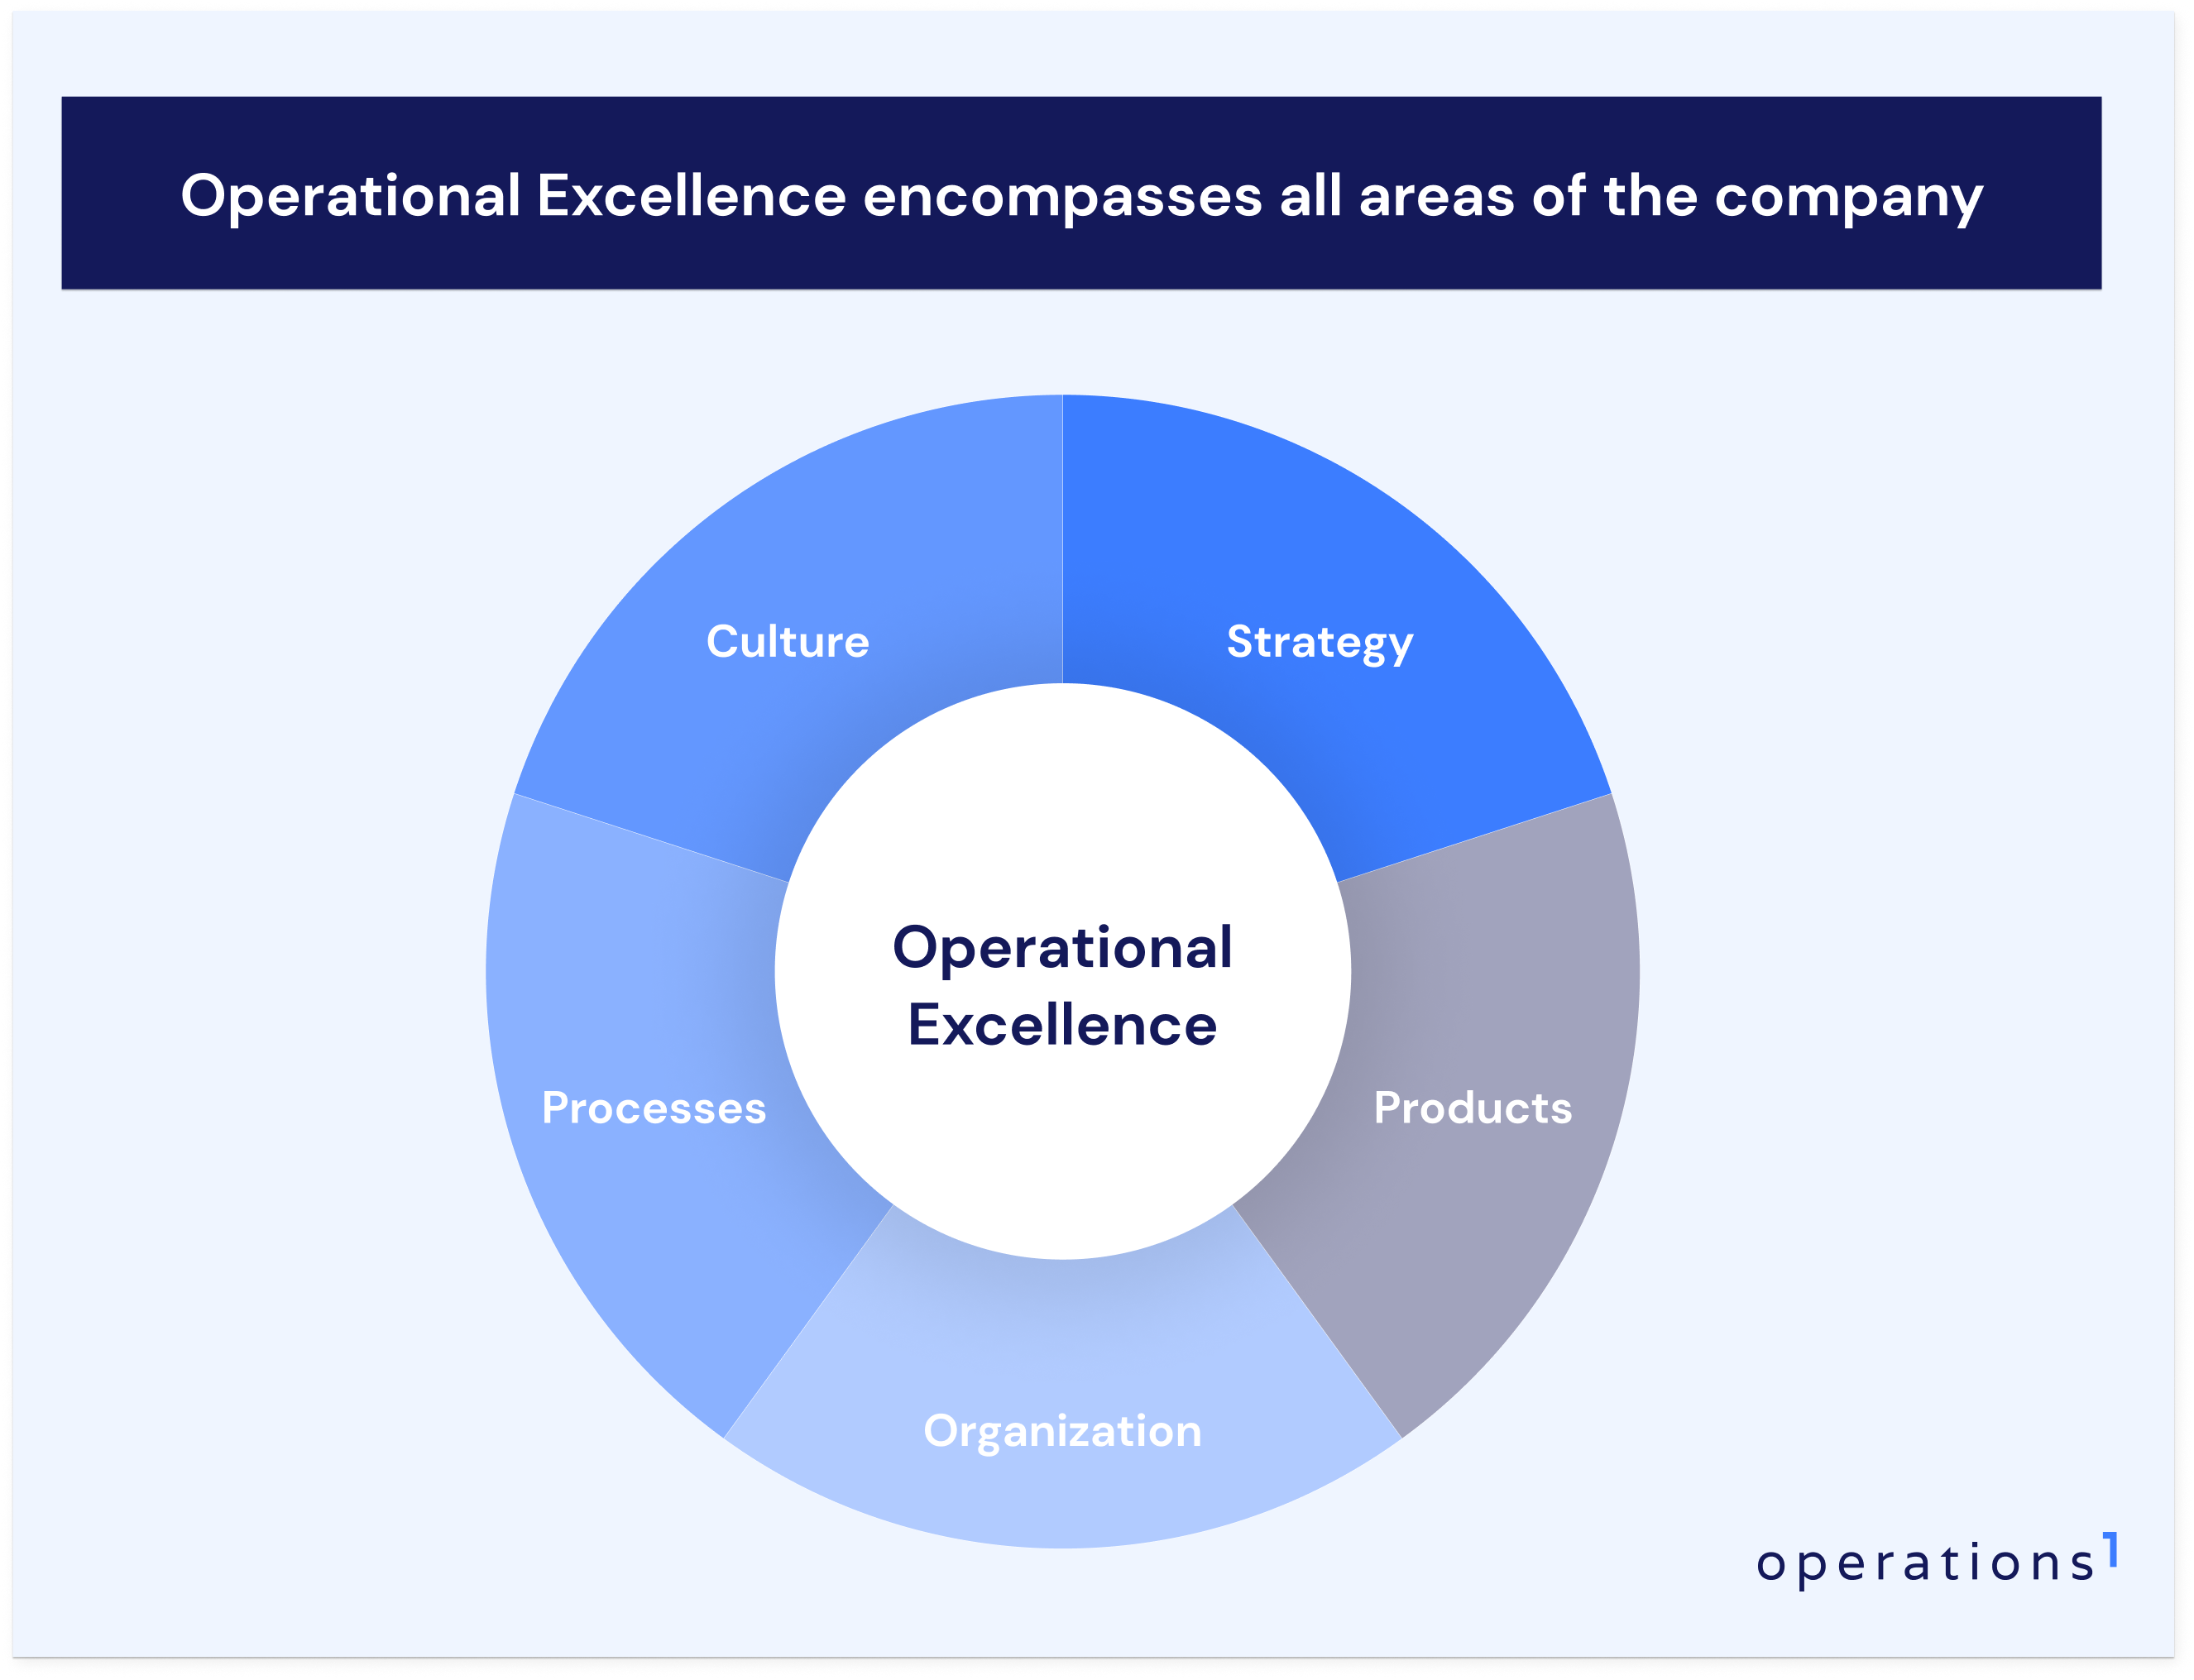 Operational Excellence encompasses all areas of the company